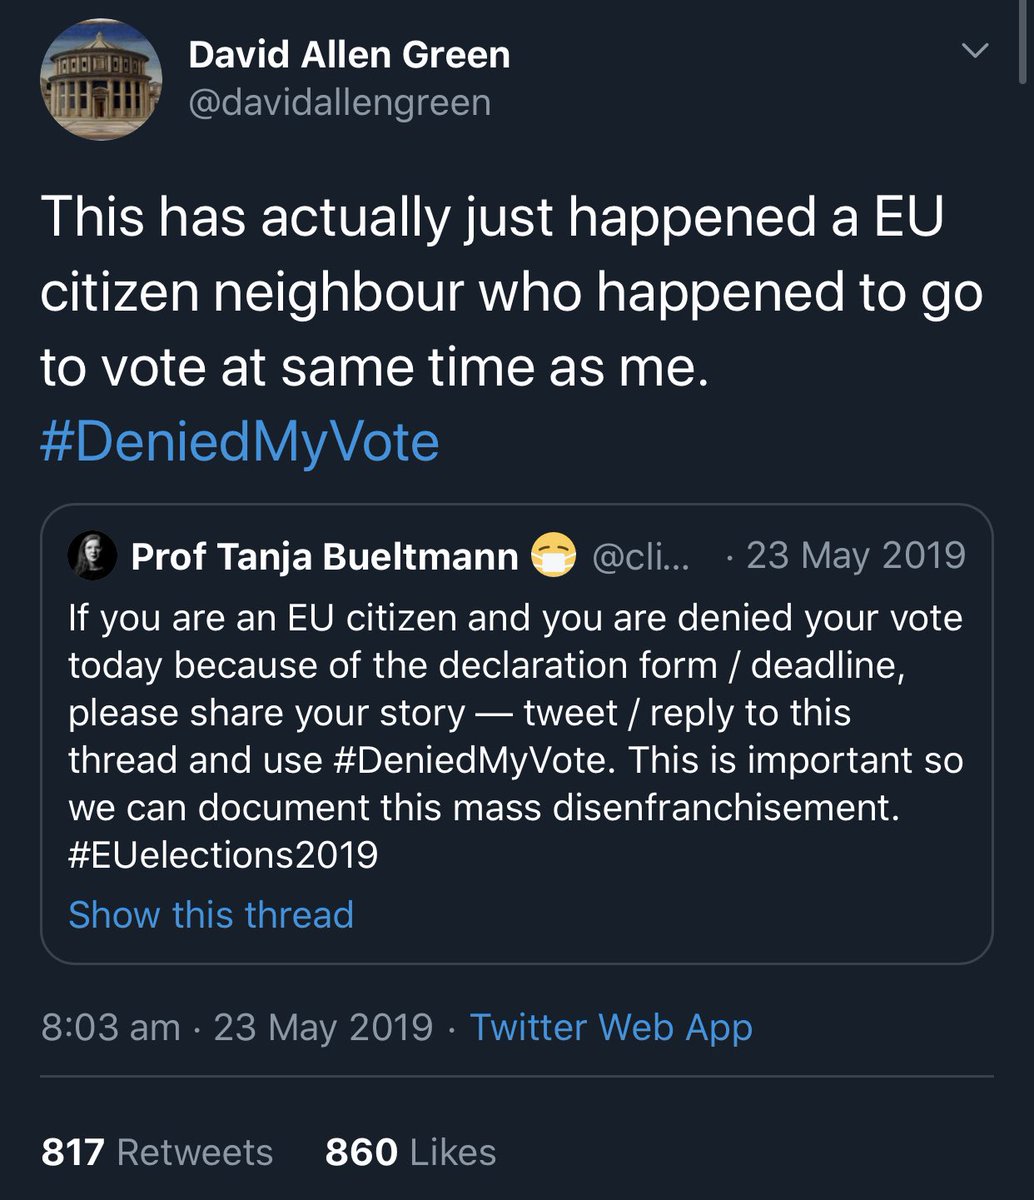 By the time I next looked at Twitter early in the morning—thanks, I think, largely to  @davidallengreen’s experience ealry in the morning (see below) which gave the problem early exposure—many  #DeniedMyVote stories were already beginning to emerge.